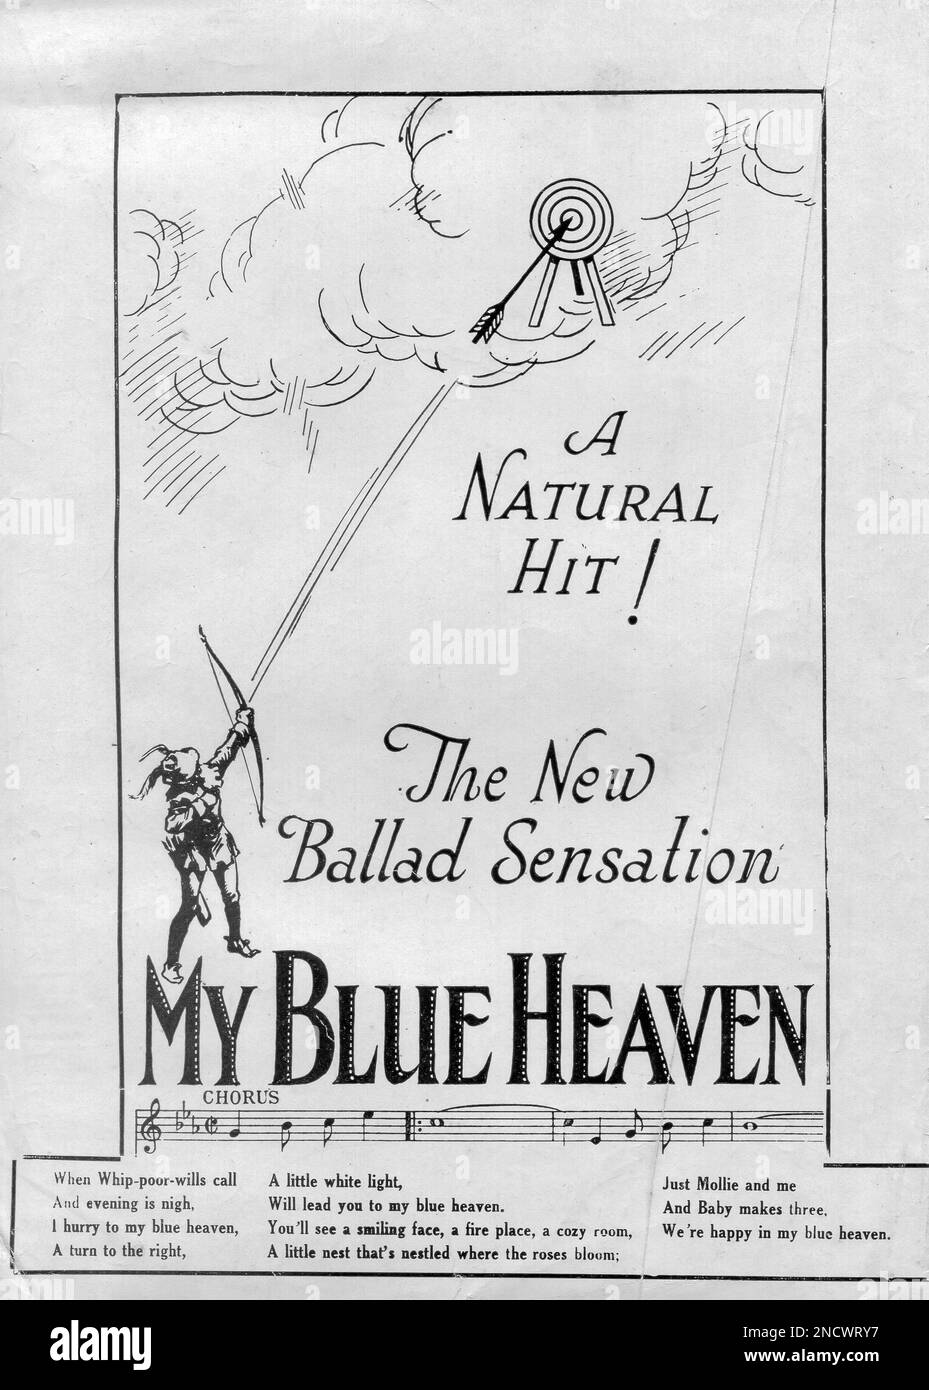 An advertisement for the sheet music for 'My Blue Heaven' which was a popular song written by Walter Donaldson, with lyrics by George A. Whiting. It was used in the Ziegfeld Follies of 1927. In 1928 it was made famous by crooner Gene Austin Stock Photo